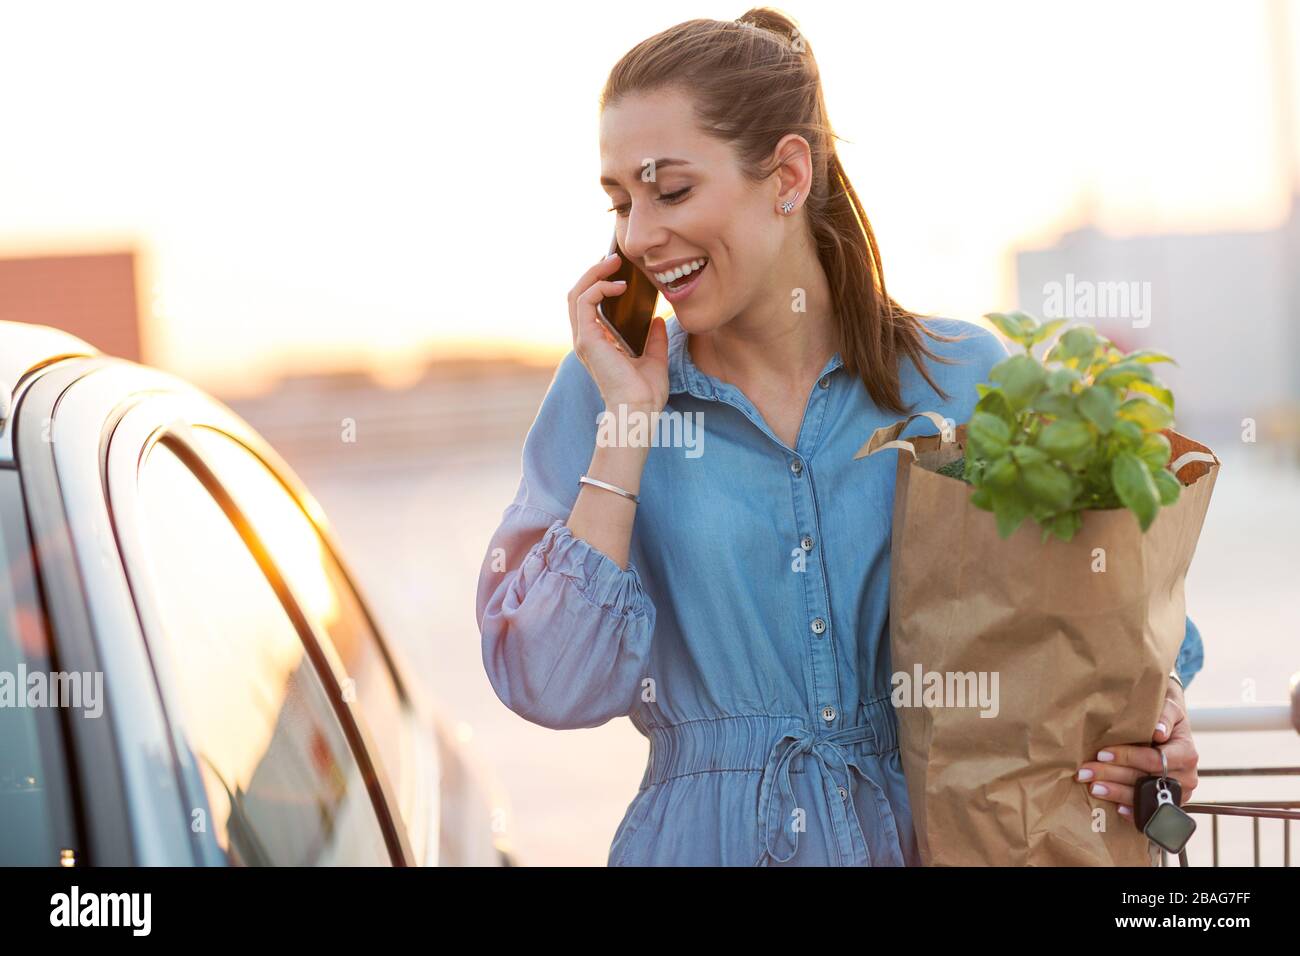 Young woman in car park, loading shopping into boot of car Stock Photo